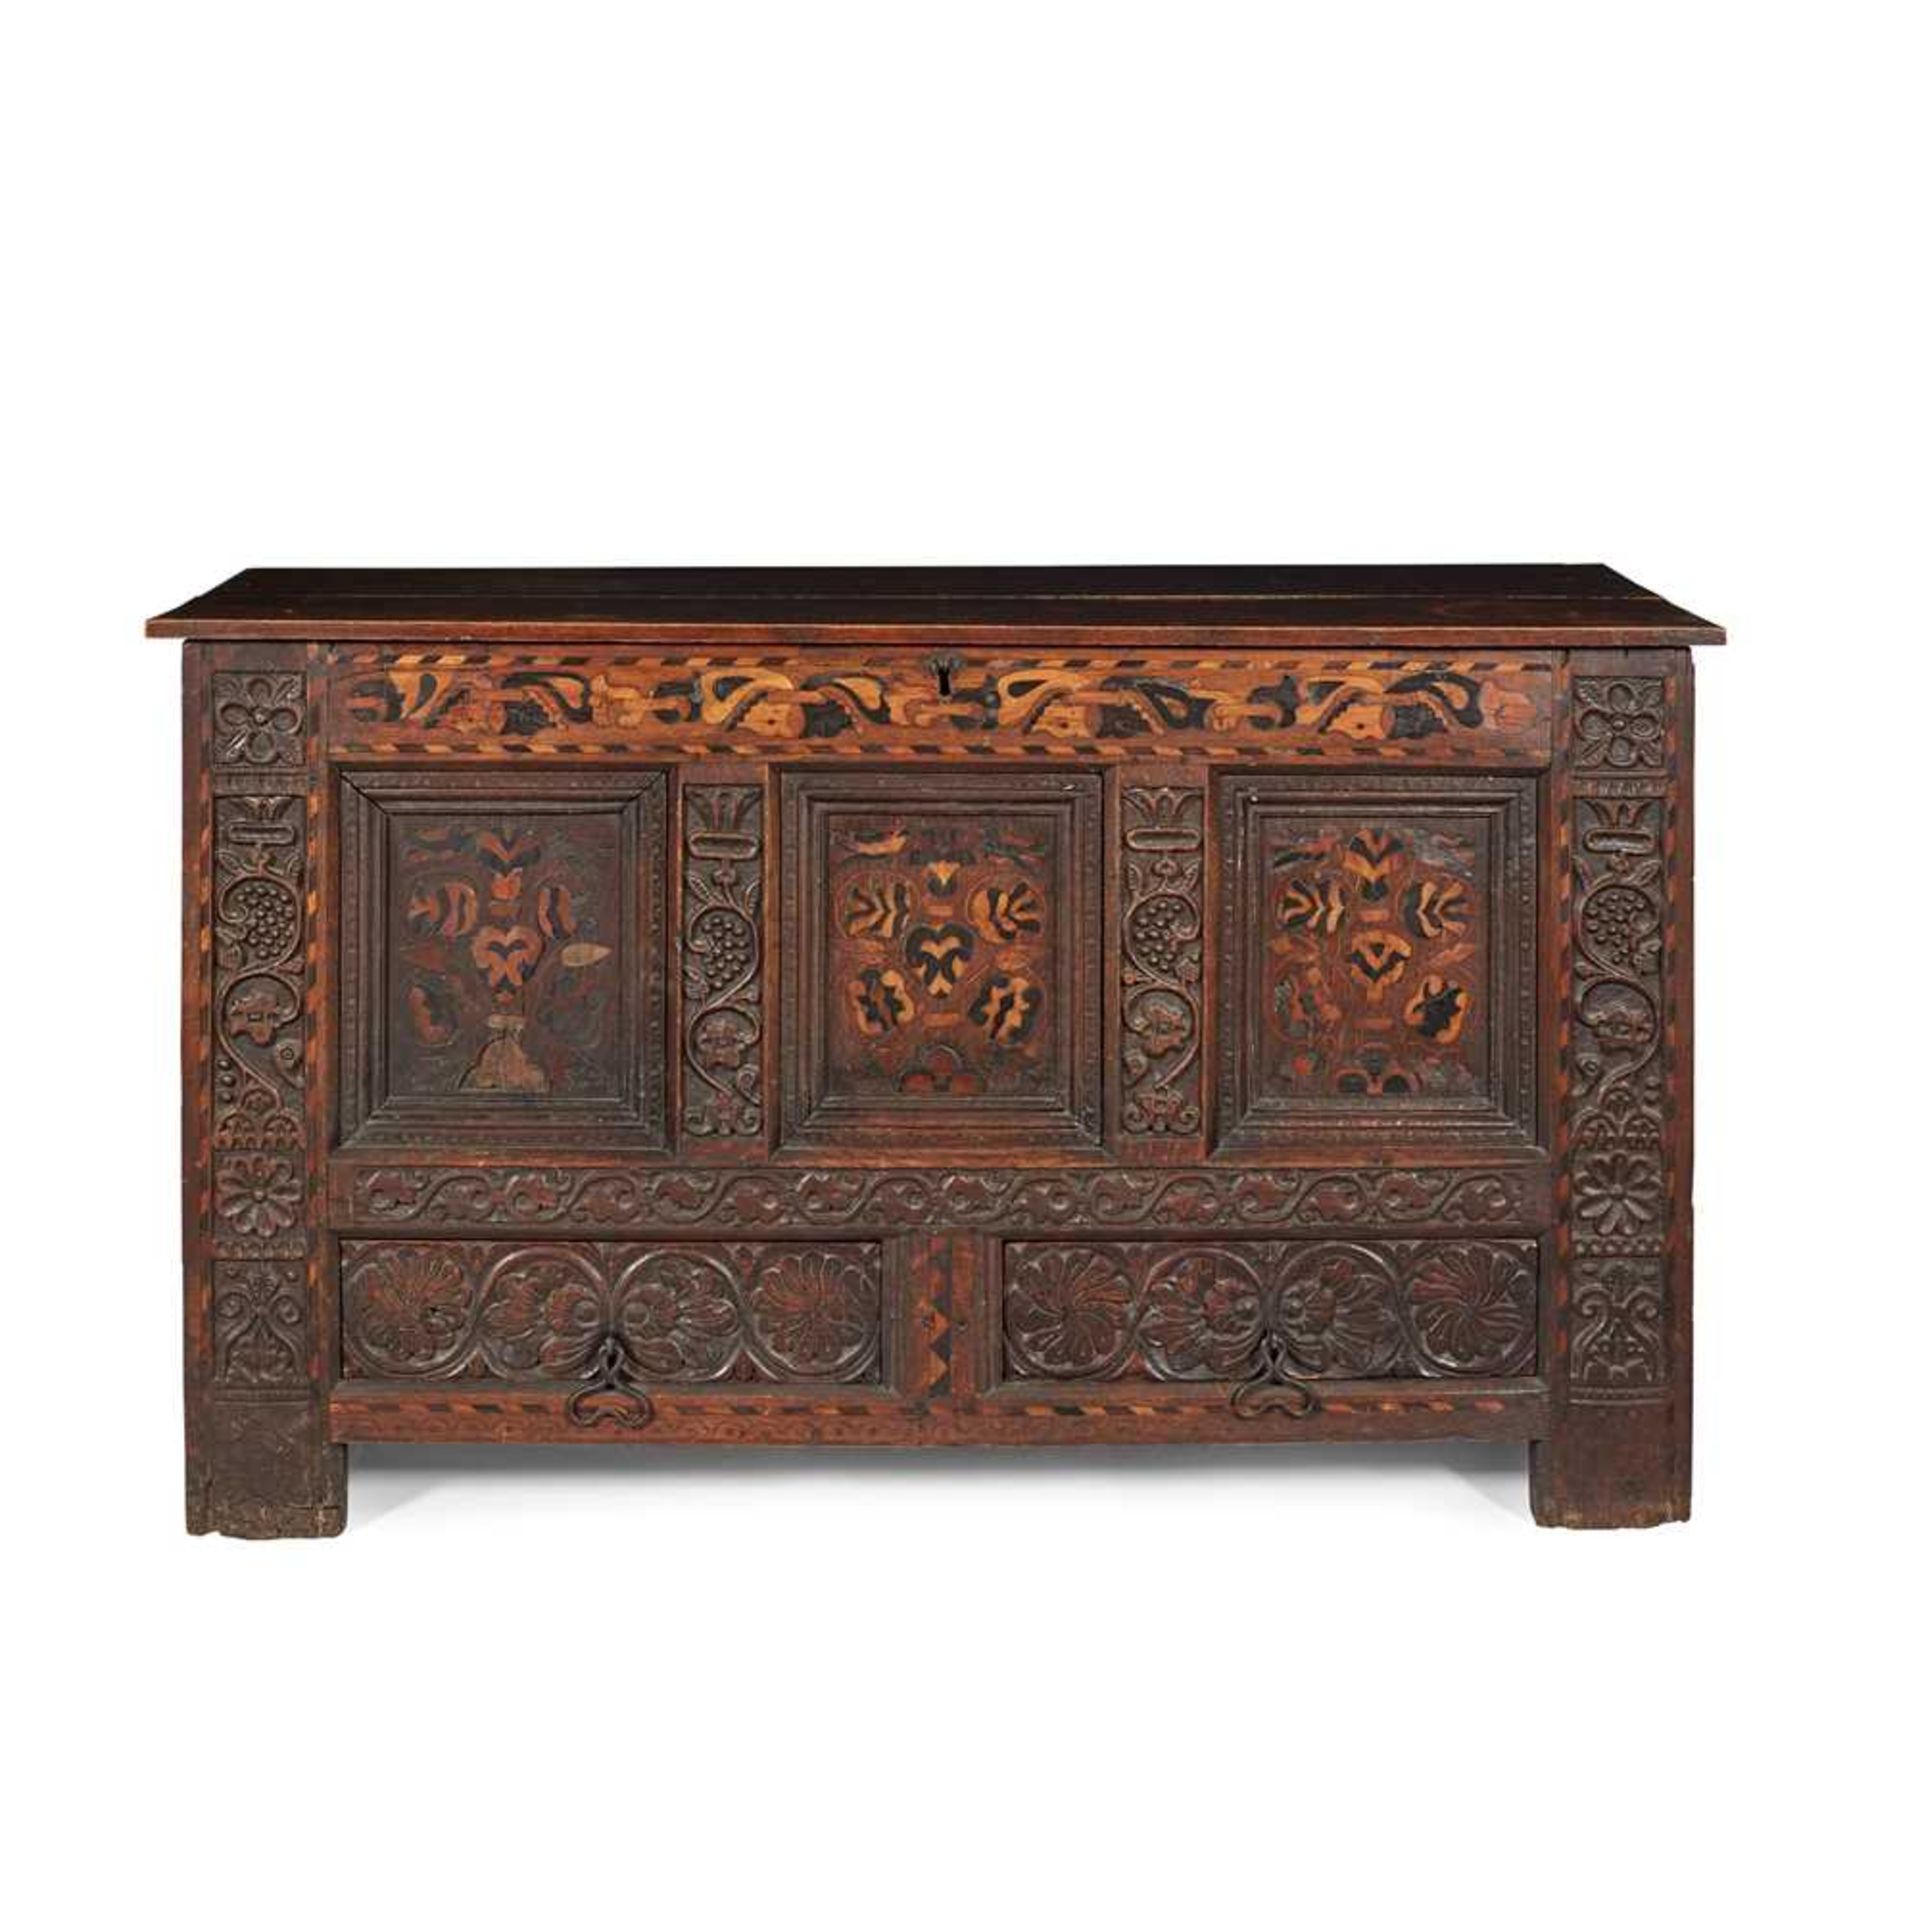 CARVED OAK AND MARQUETRY MULE CHEST 17TH CENTURY